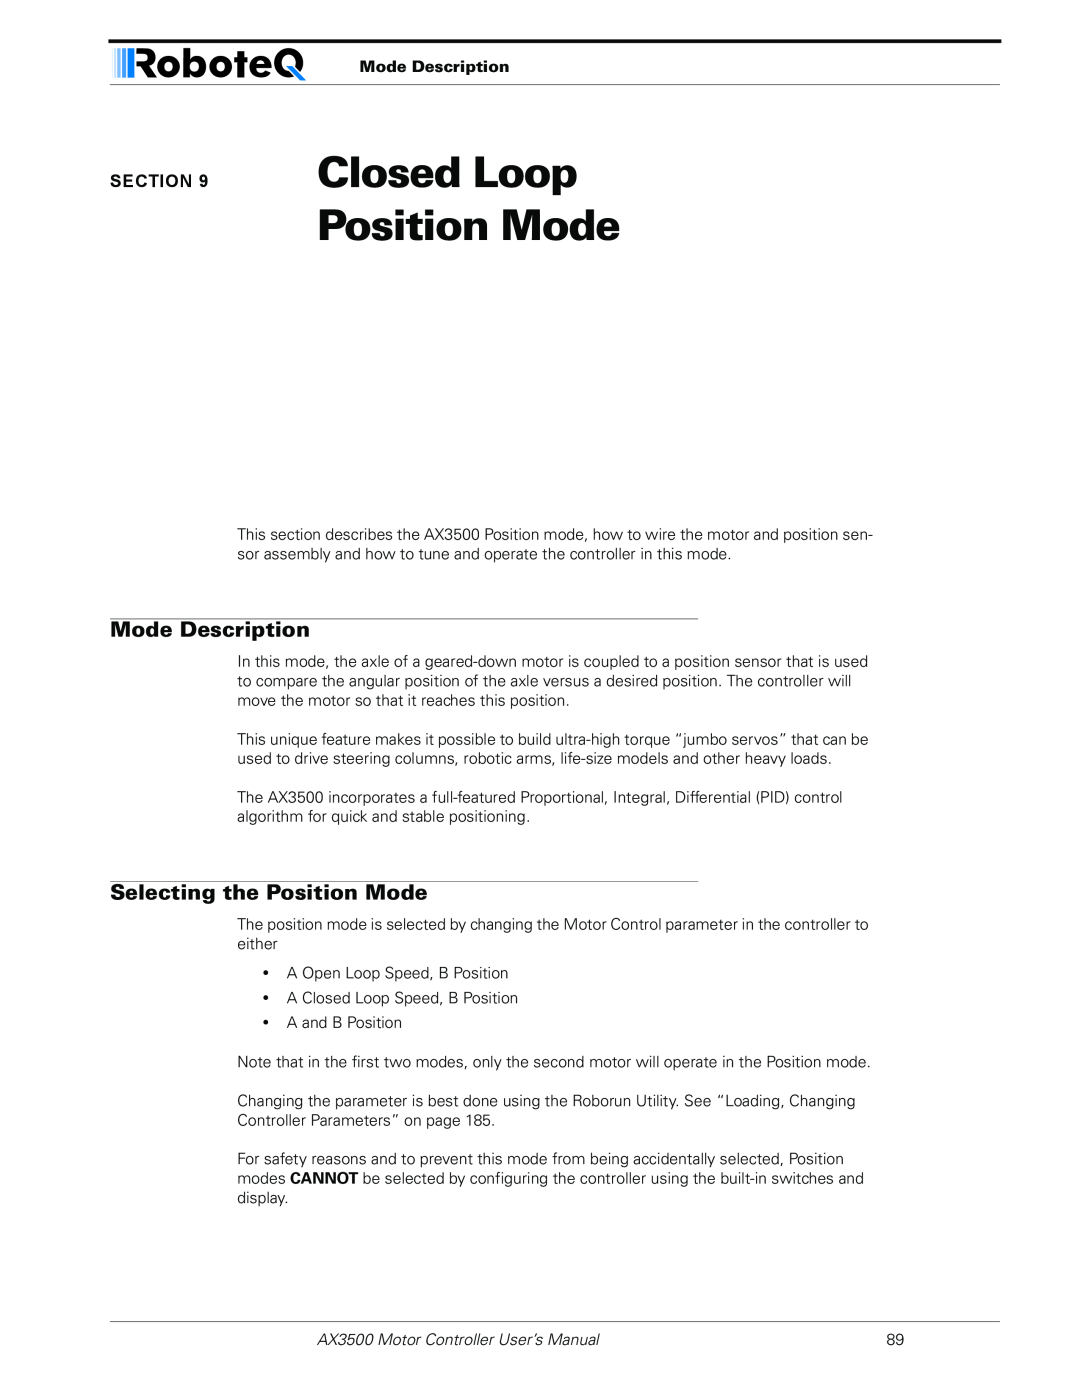 RoboteQ AX3500 user manual Closed Loop Position Mode, Mode Description, Selecting the Position Mode 